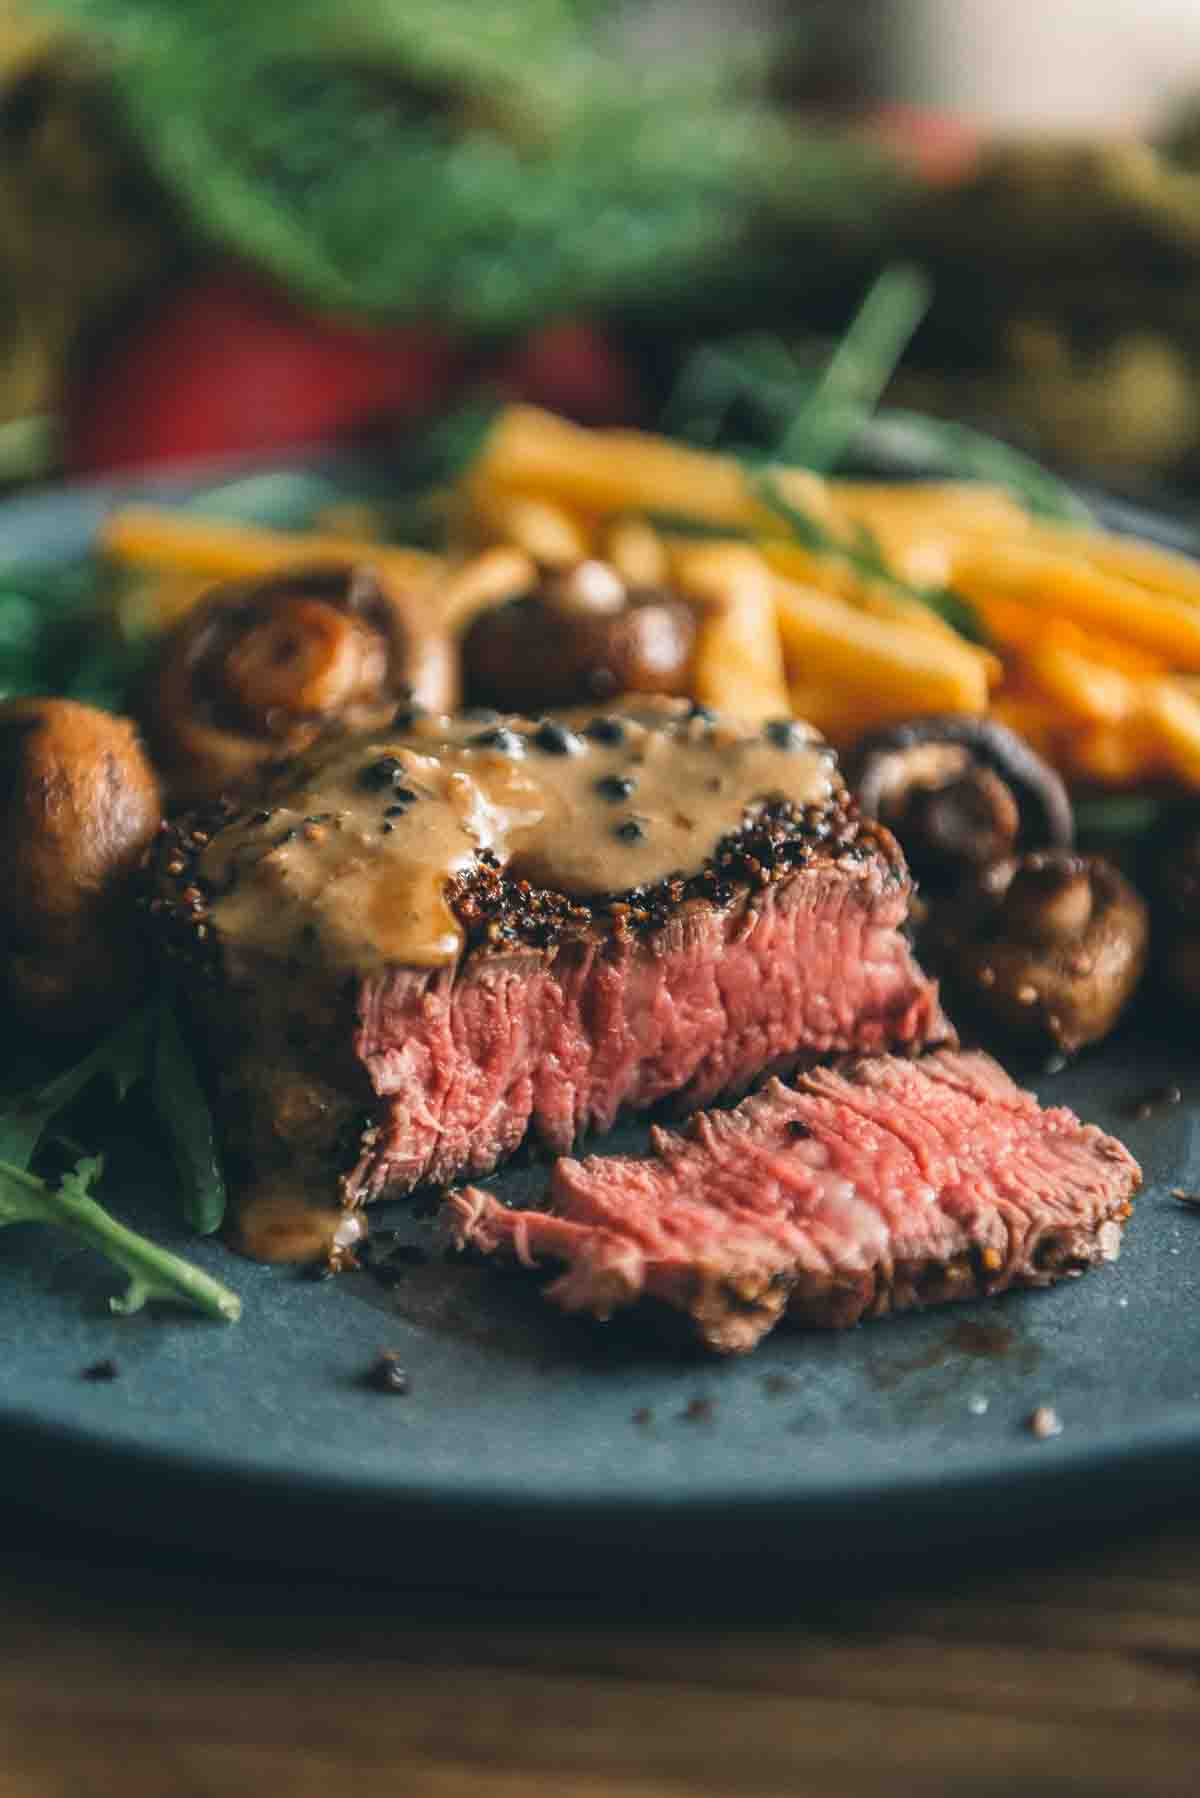 Perfectly cooked and sliced filet mignon steak topped with creamy sauce. 